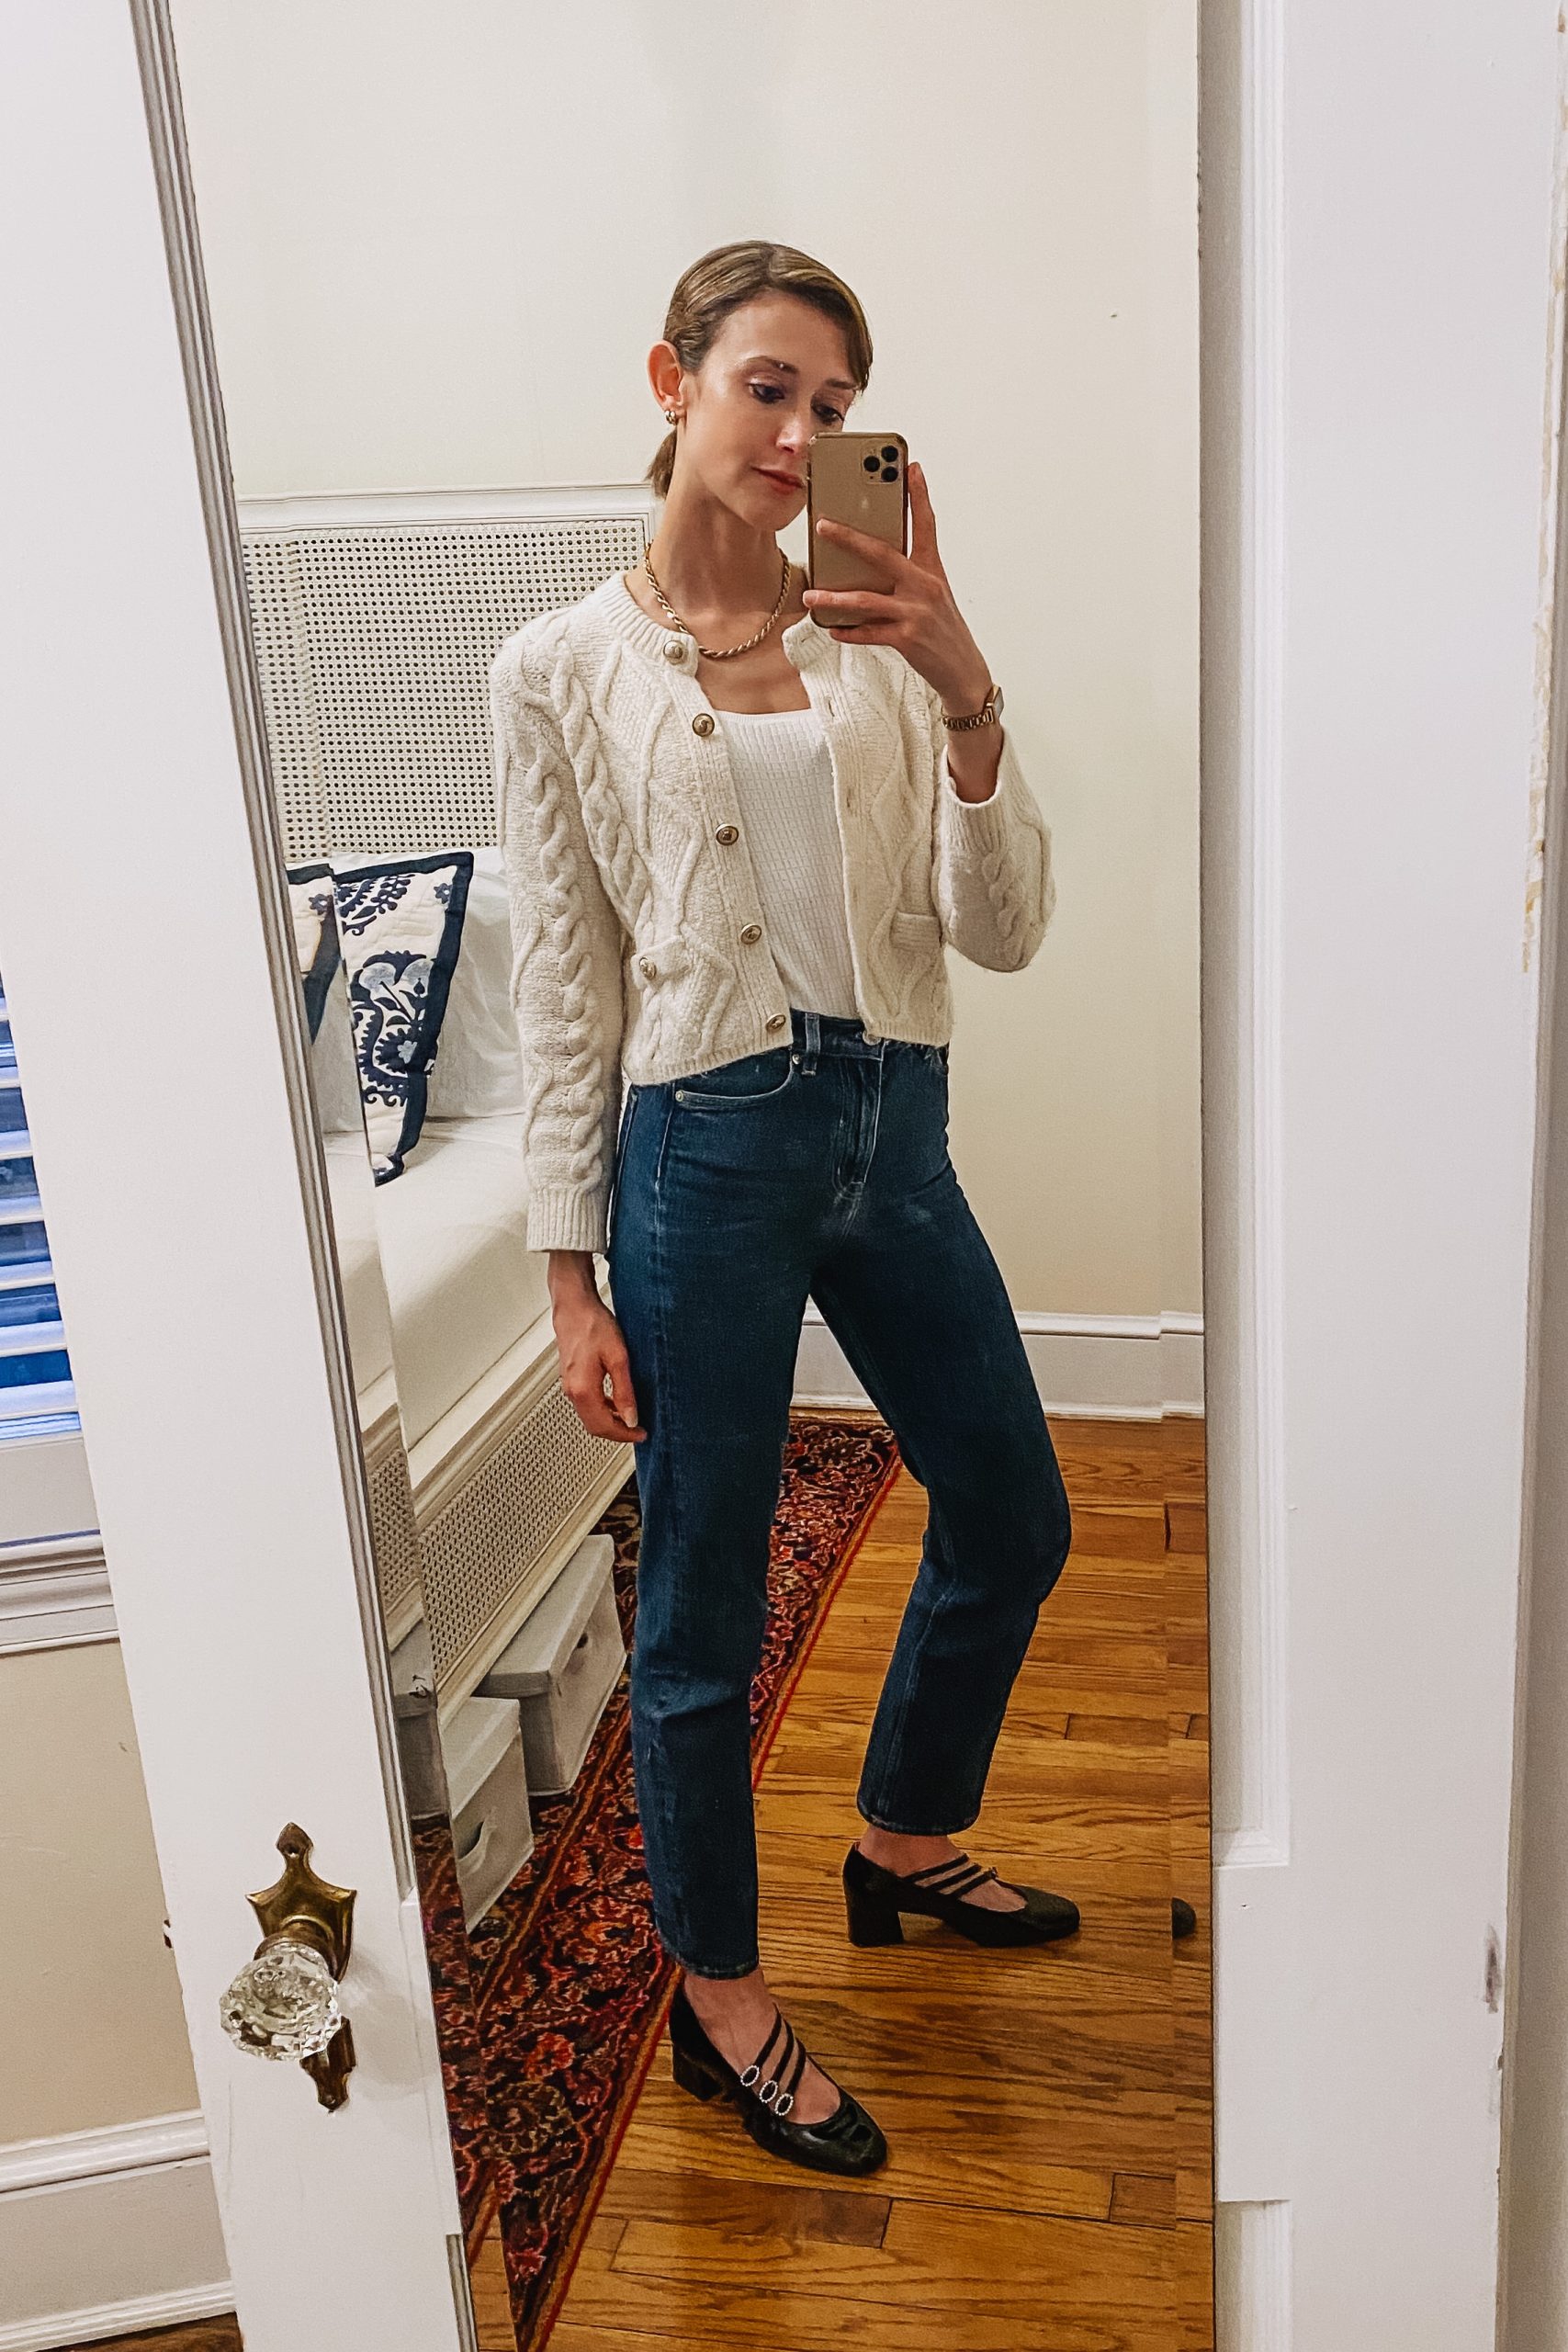 5 dinner outfit ideas